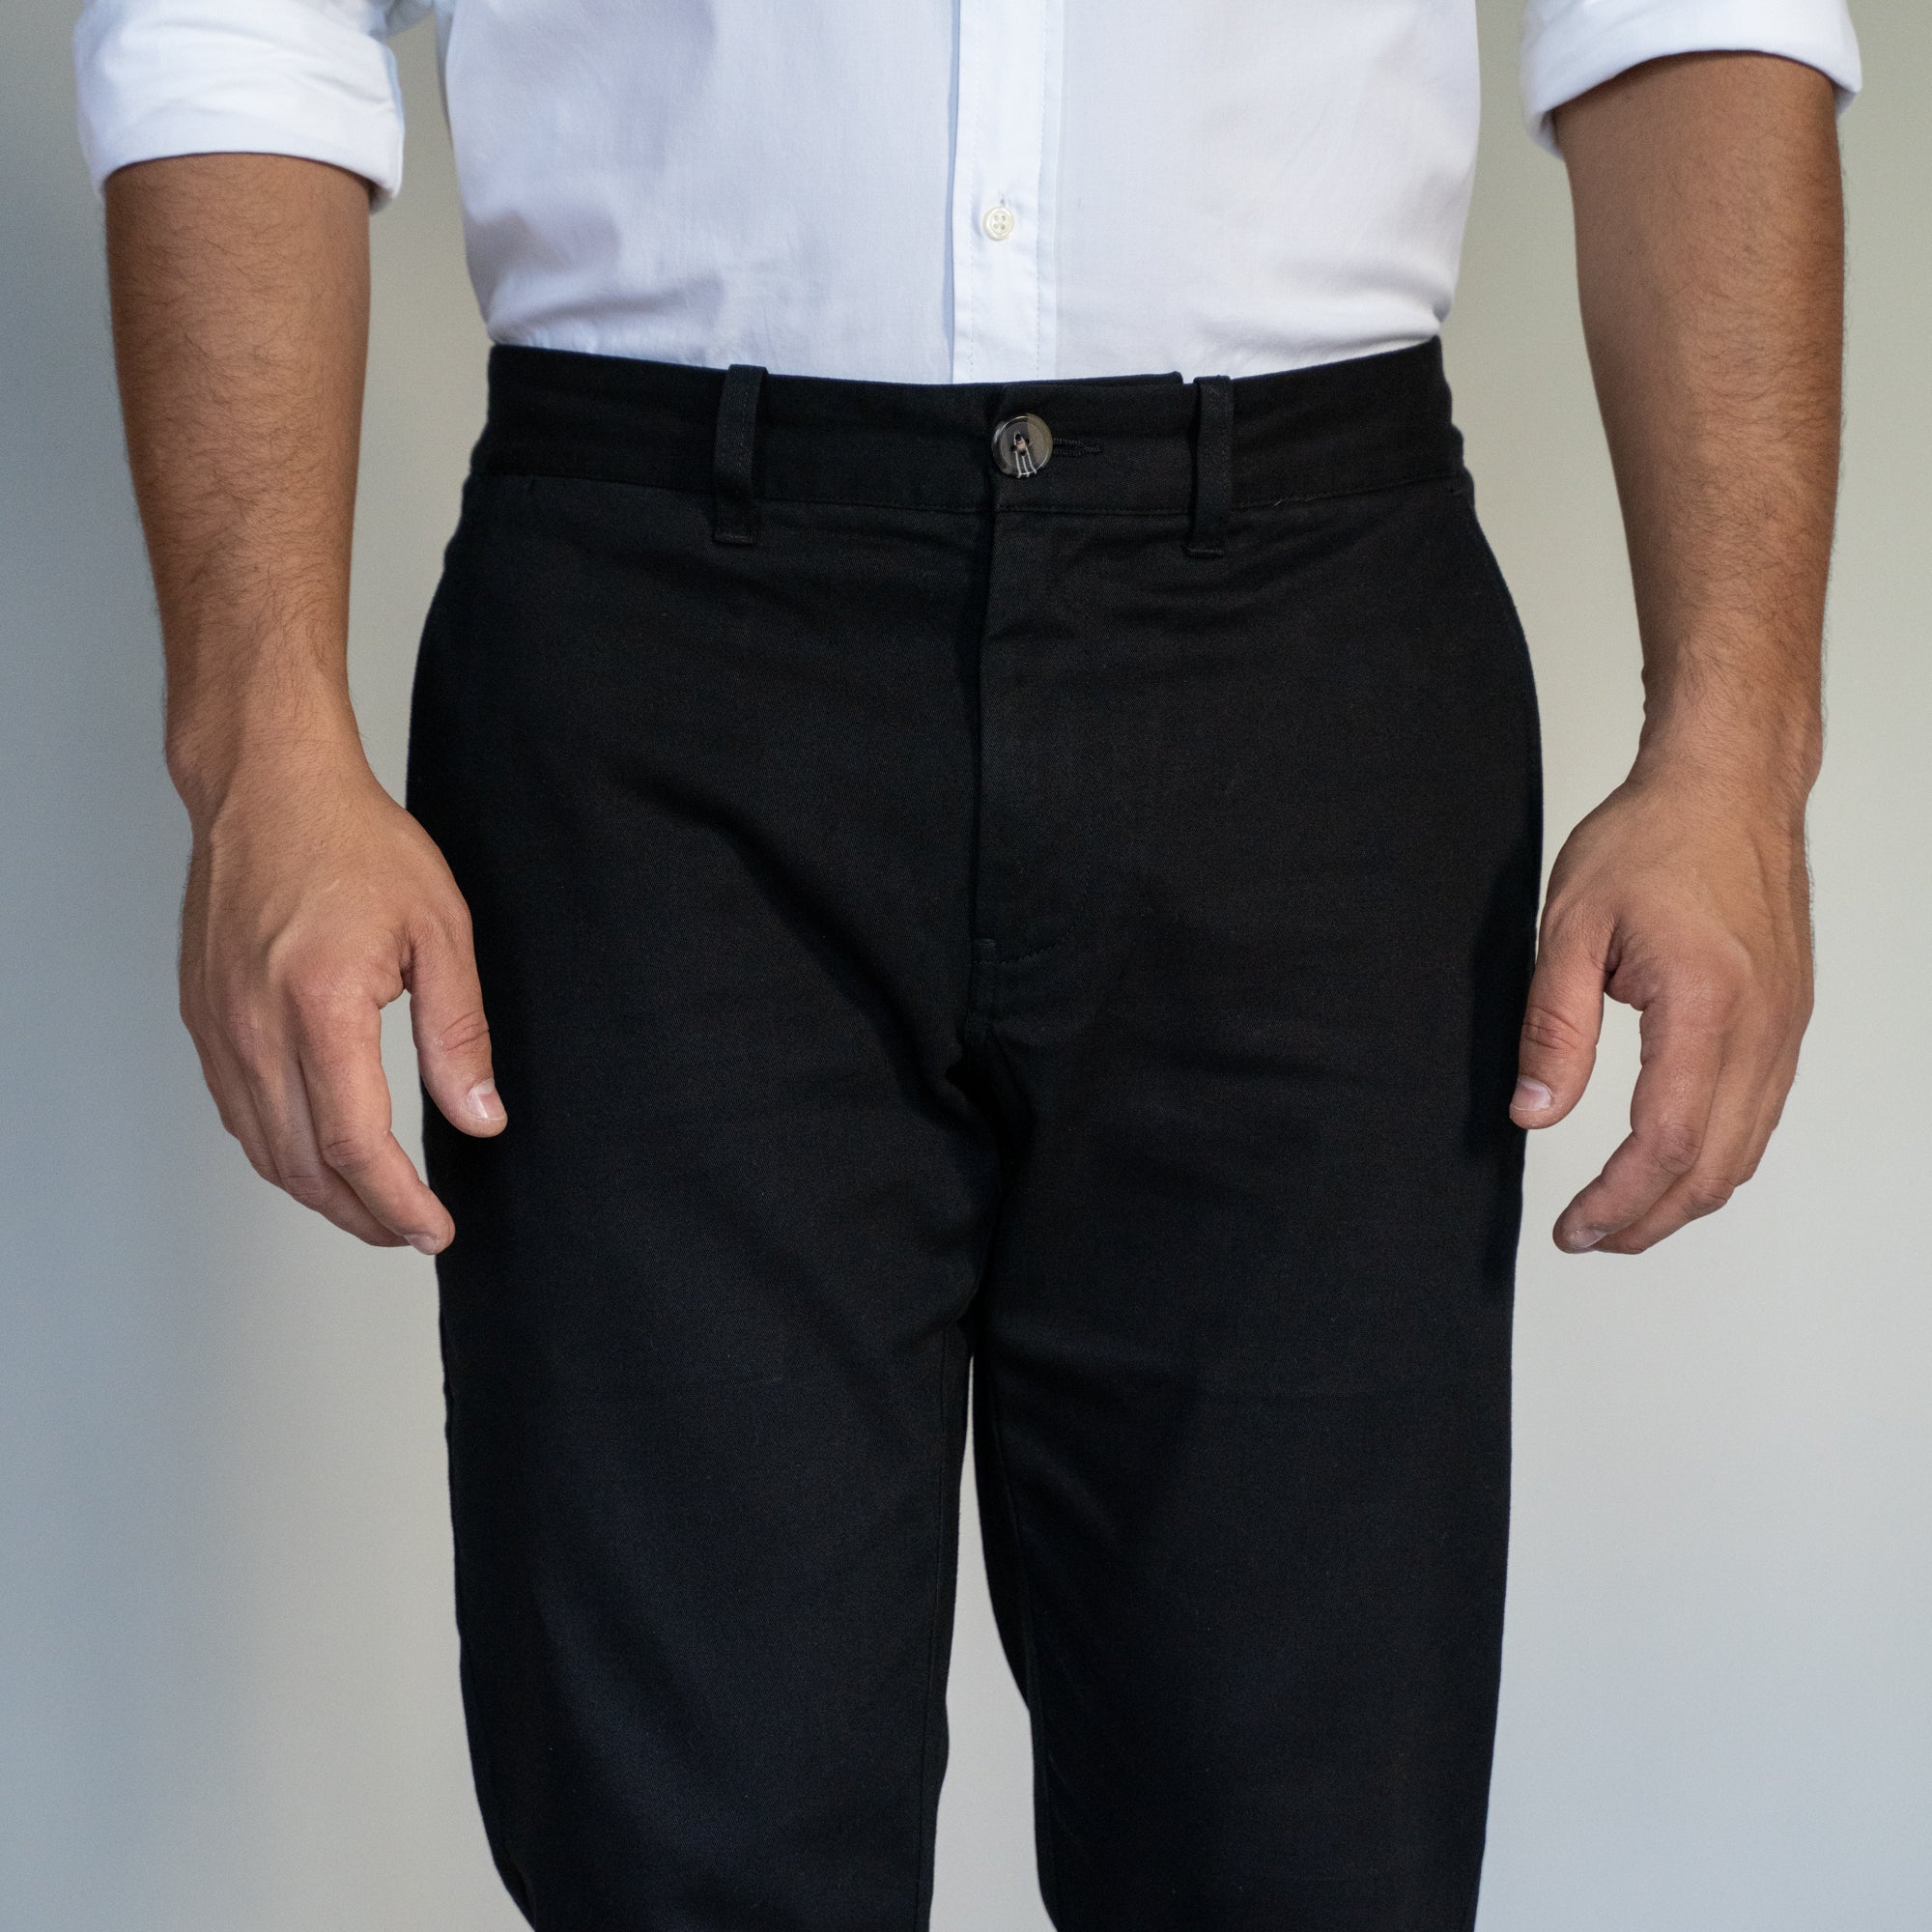 Trousers, Chinos and Tailored Pants Singapore - Perfect Attire